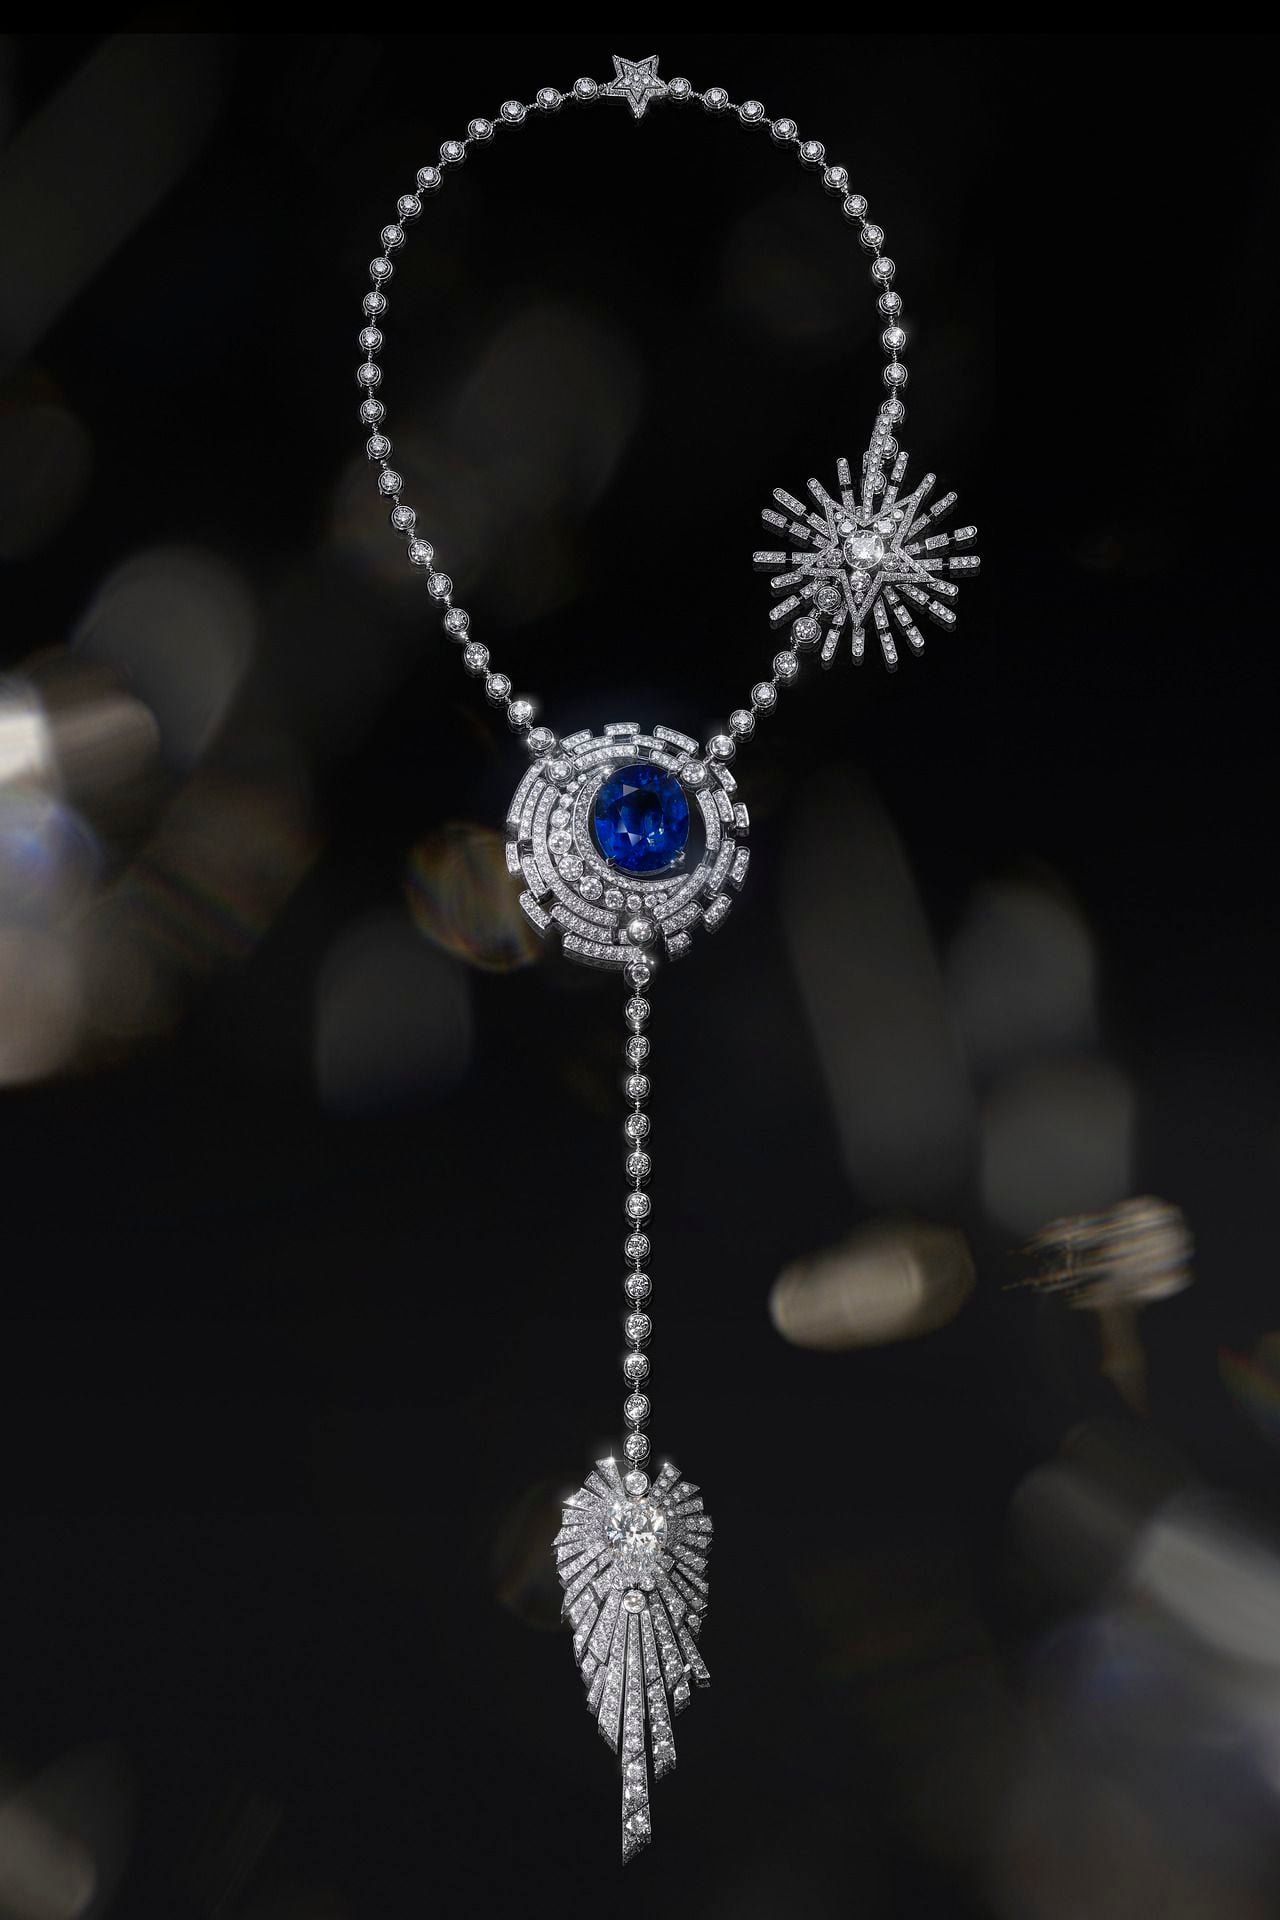 Why are luxury fashion brands delving into high jewellery? Coco Chanel  disrupted Parisian jewellers with Bijoux de Diamants in 1932 – now, Louis  Vuitton, Prada and Dior are launching collections too